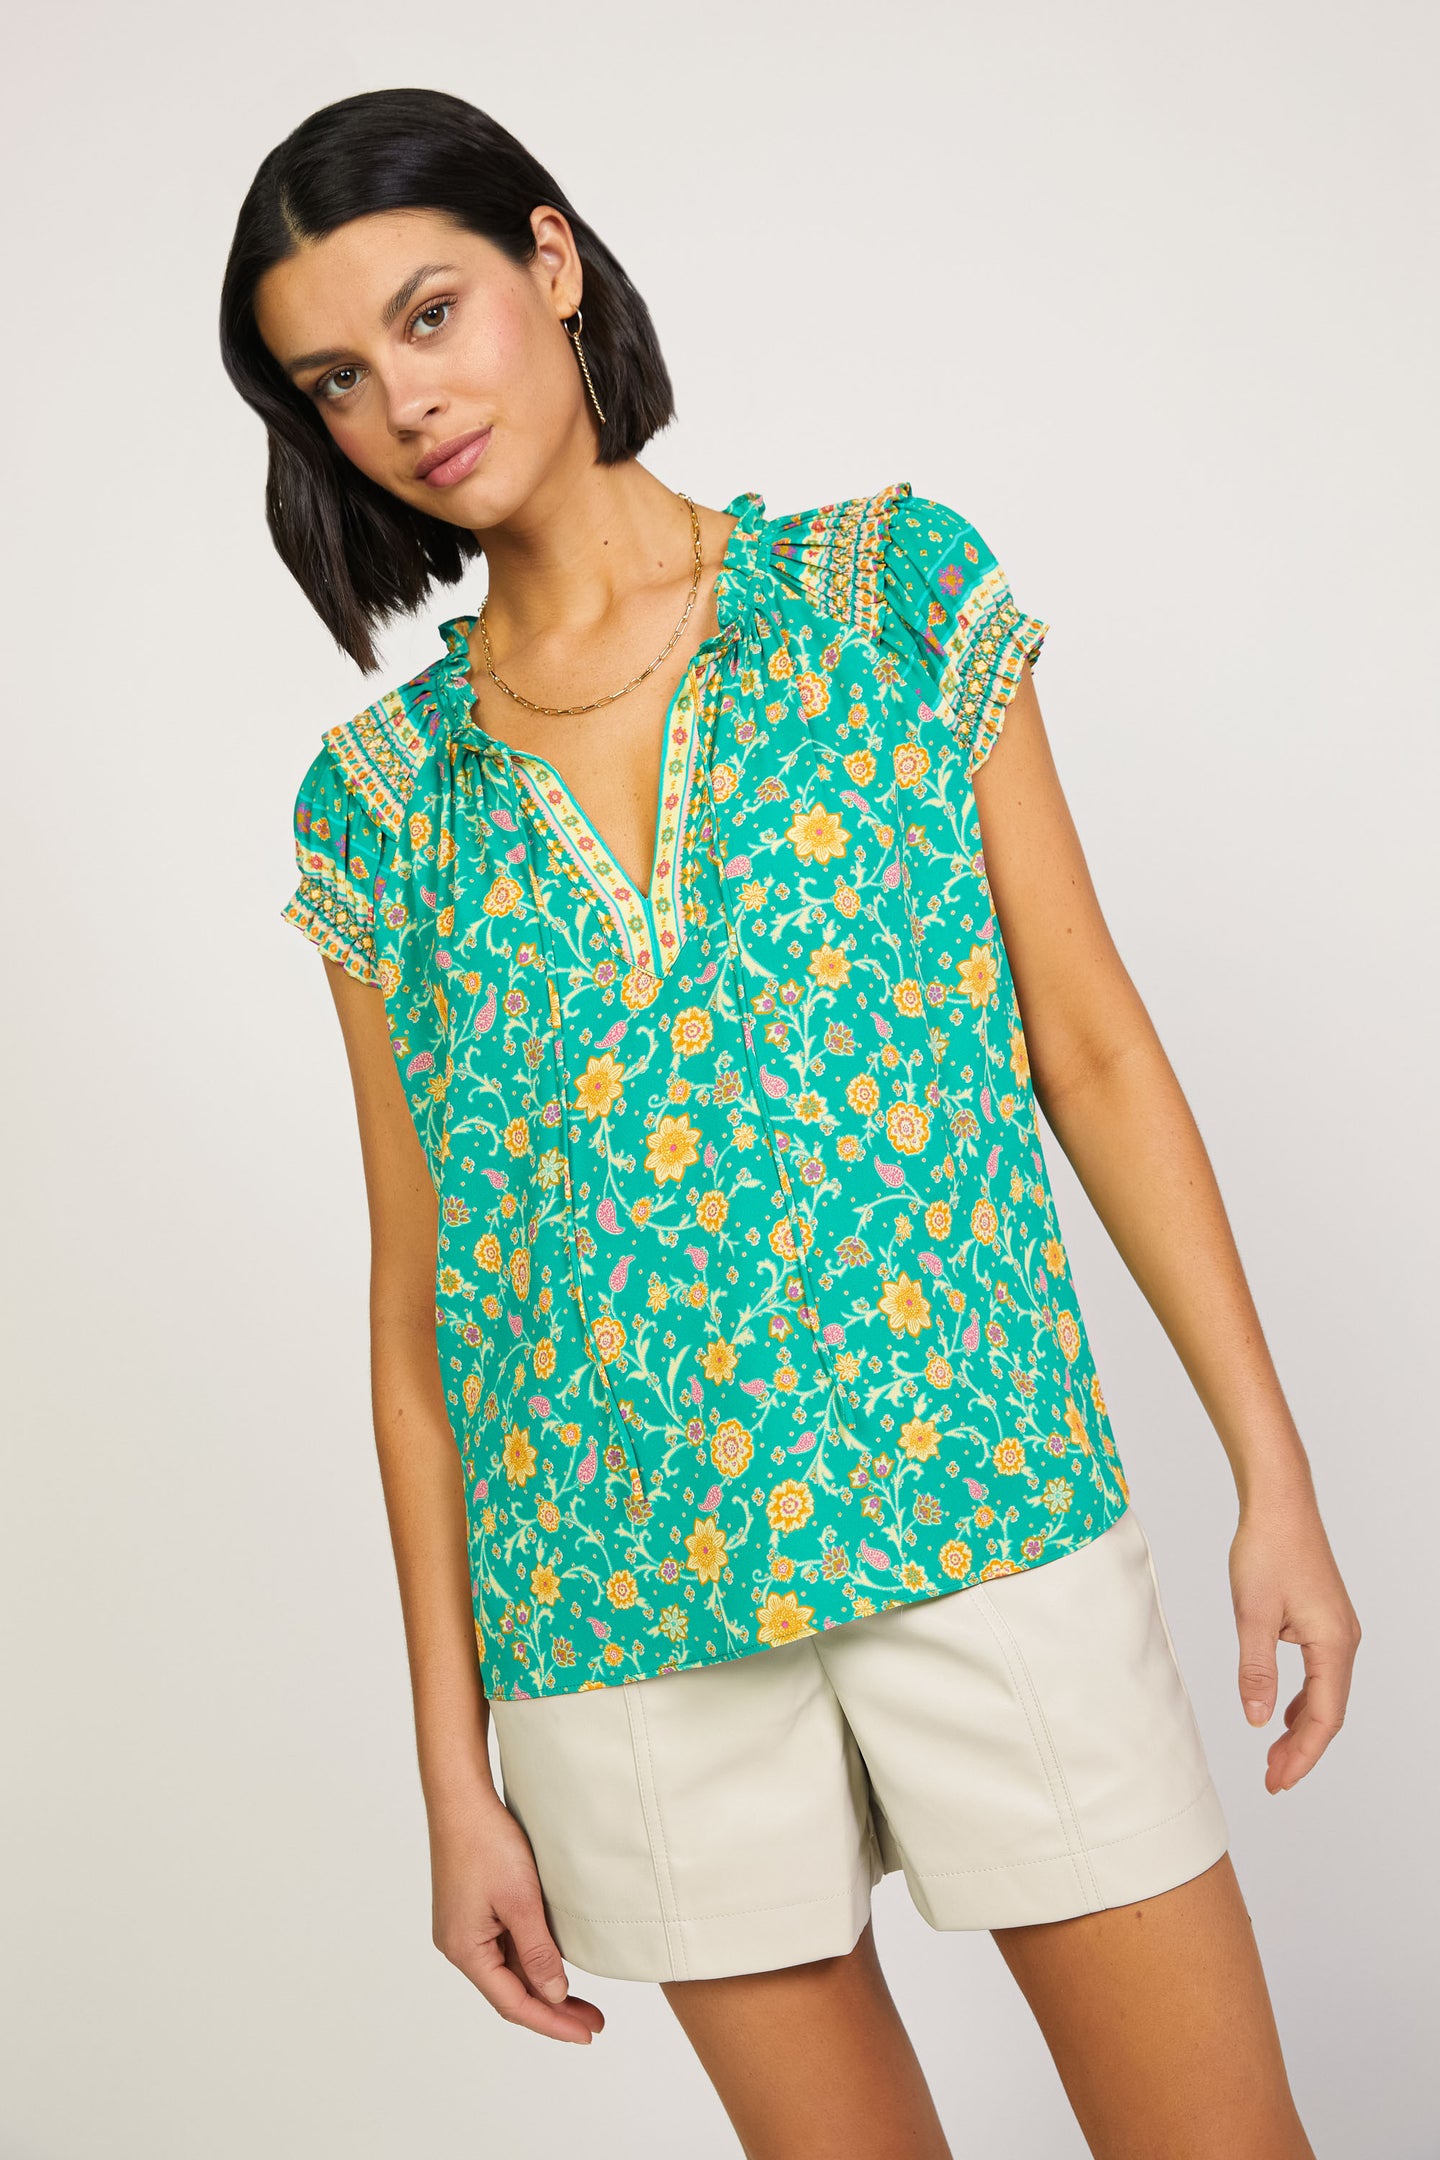 Women's Foral Tops, Explore our New Arrivals